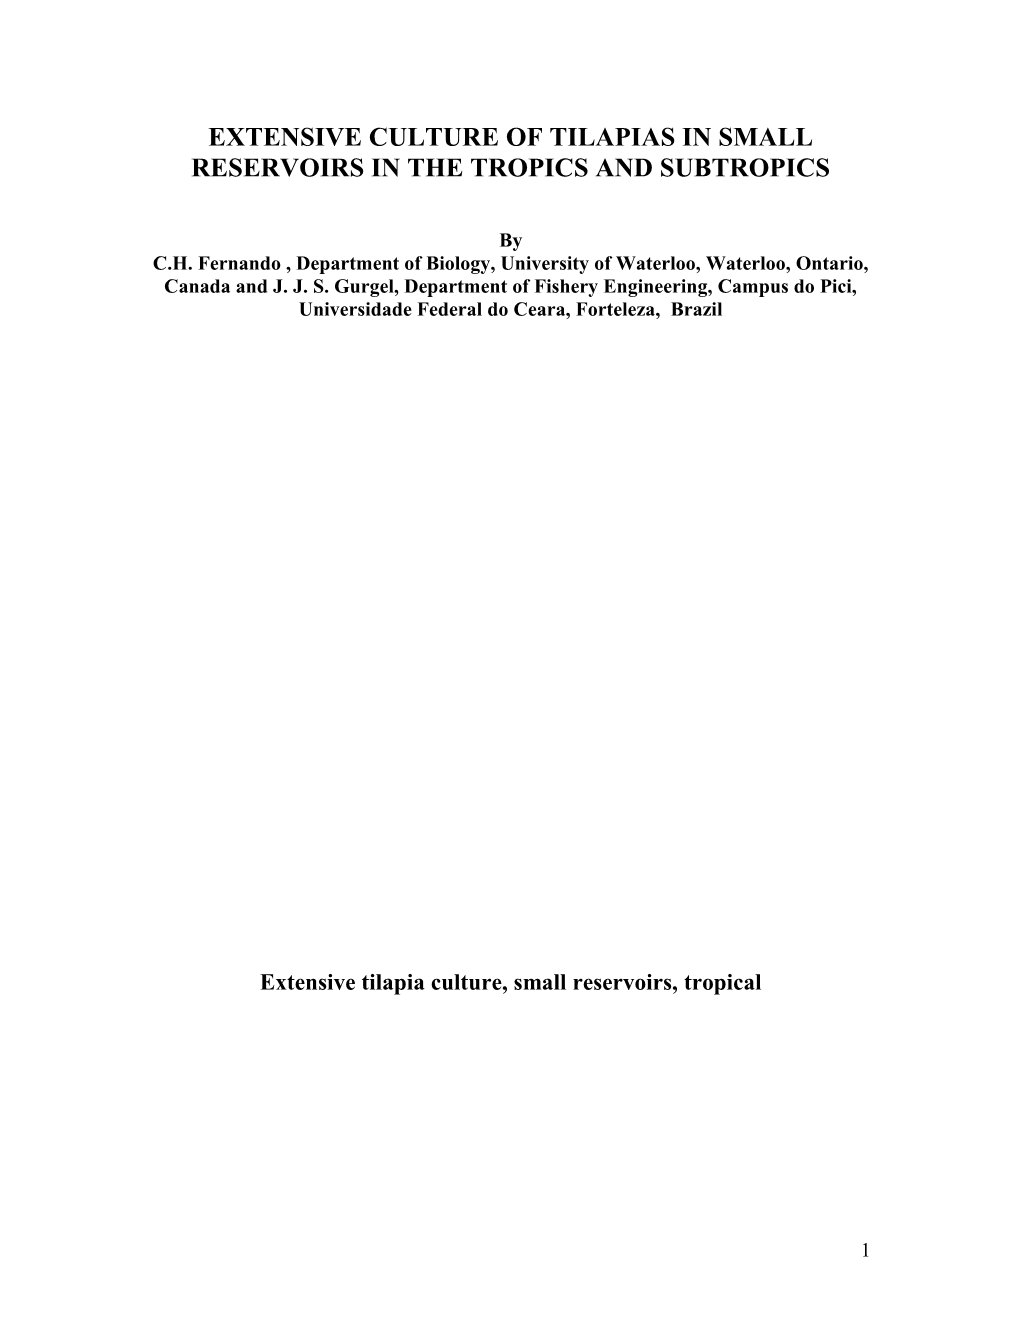 The Potential and Use of Small Reservoirs in the Tropics and Subtropics for Extensive Culture